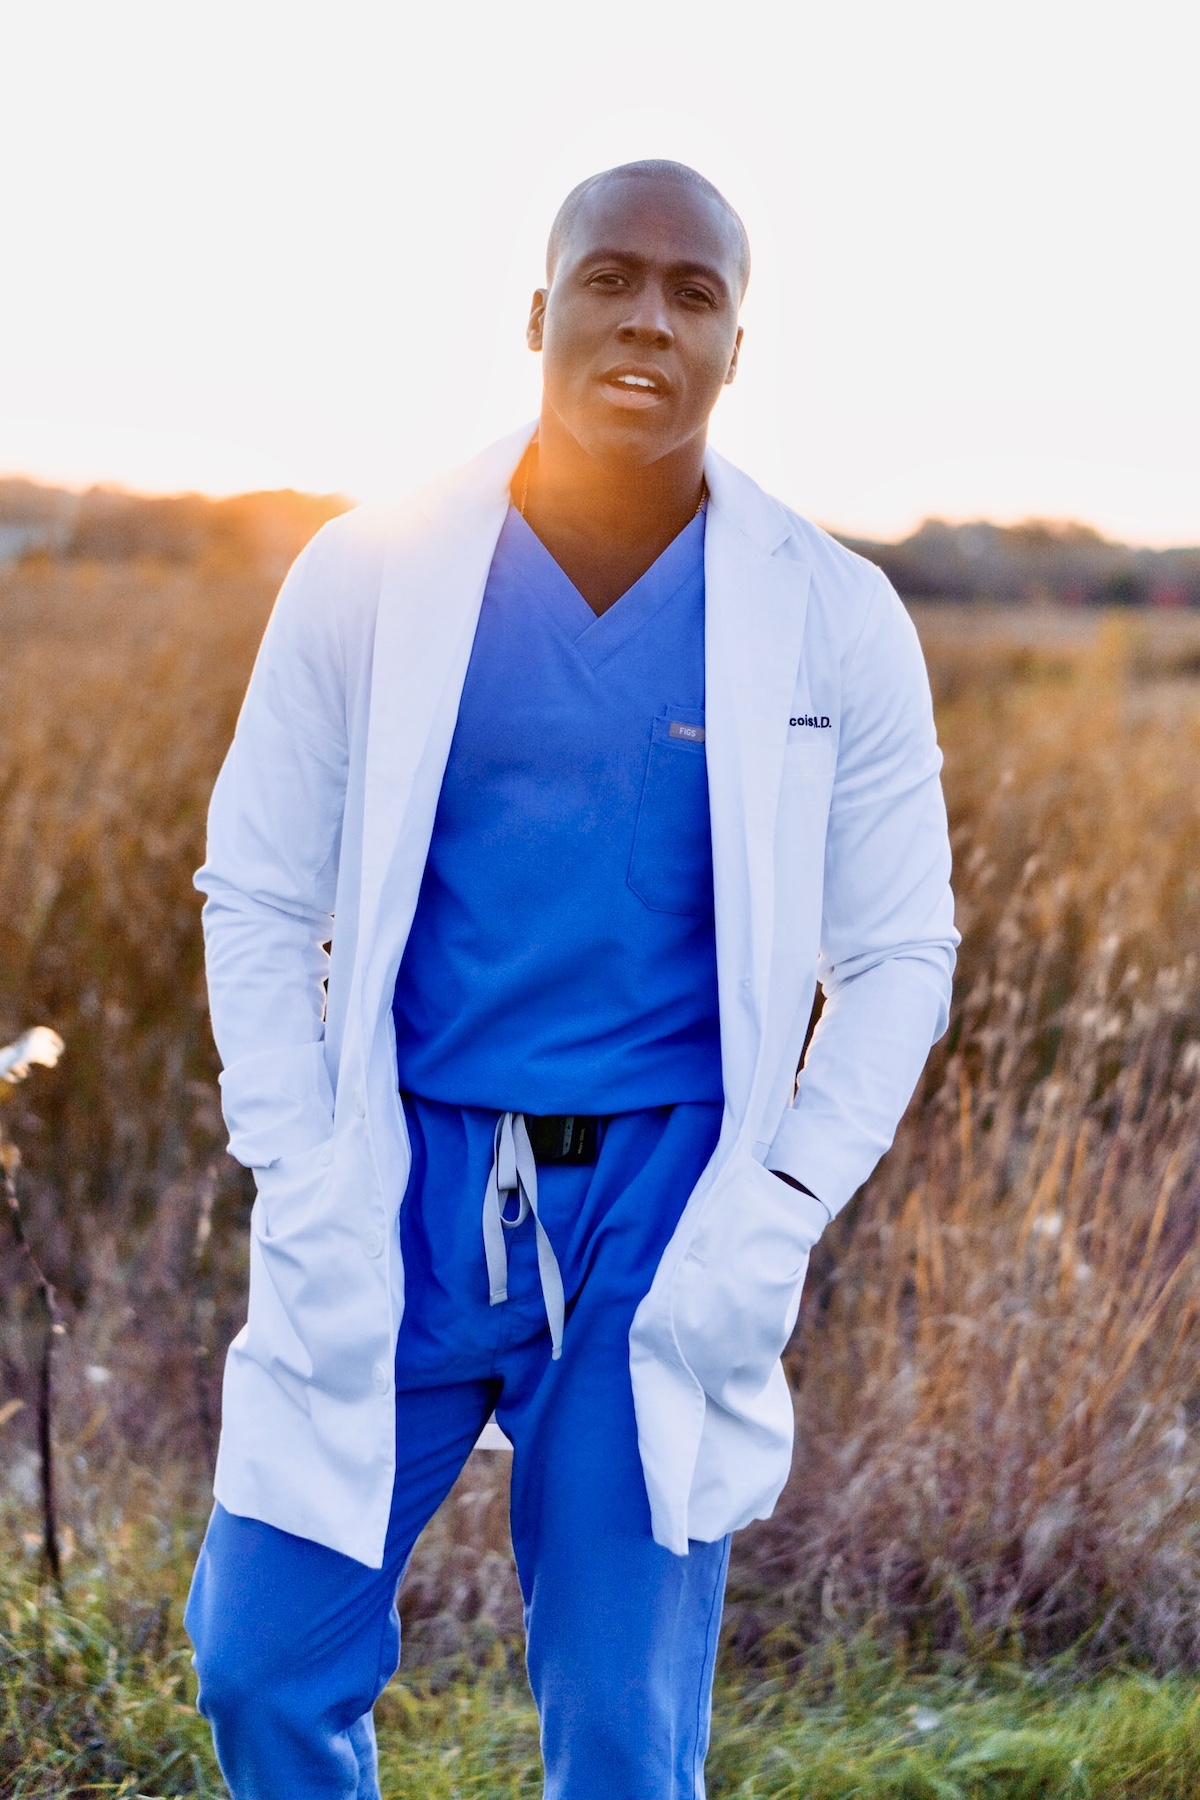 Dr. Elvis Francois, 'The Singing Surgeon' from The Masked Singer wearing a white coat and standing in a field  